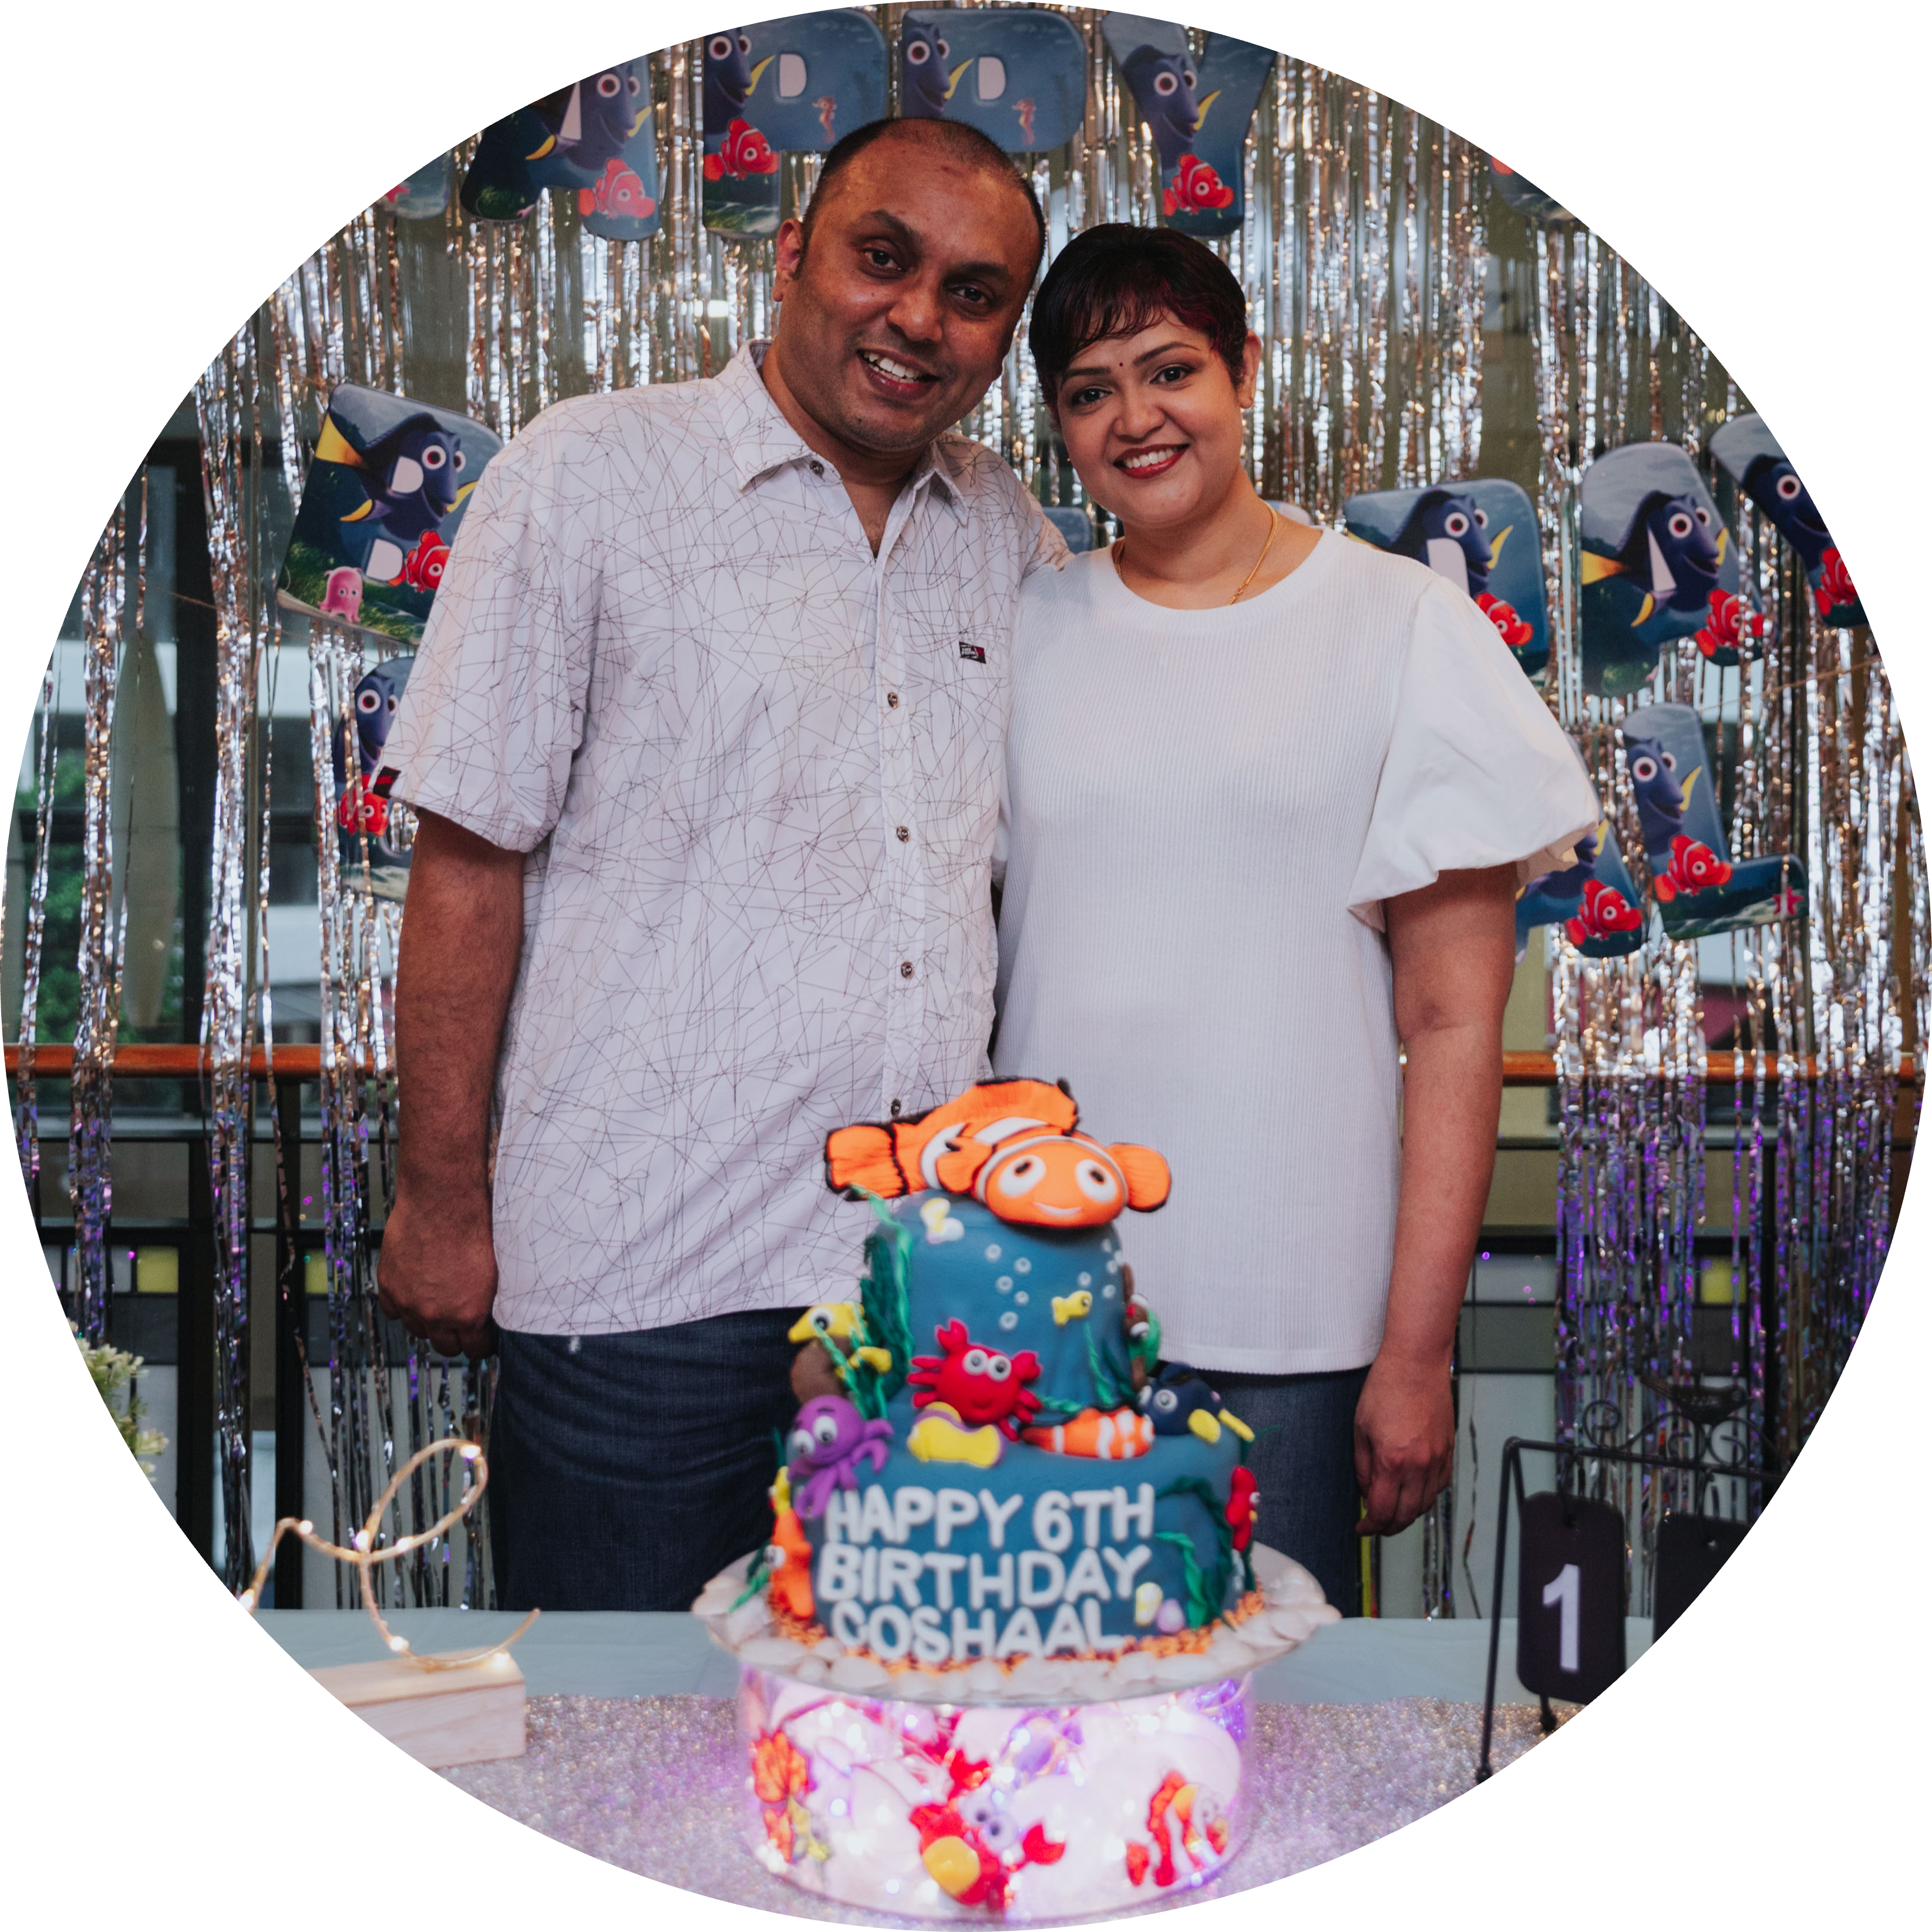 family photography service in singapore for birthday party